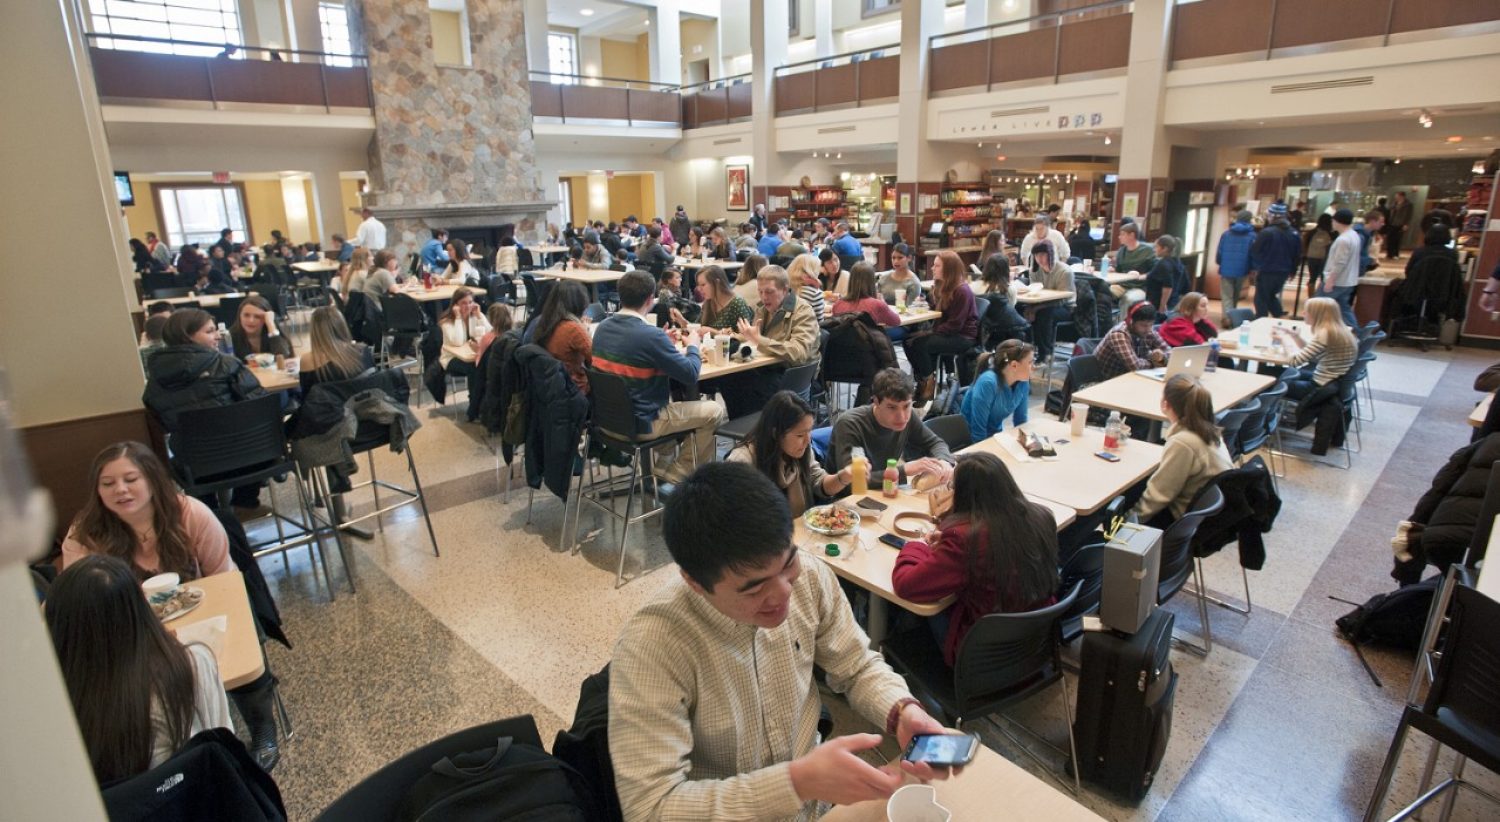 Corcoran Commons at Boston College